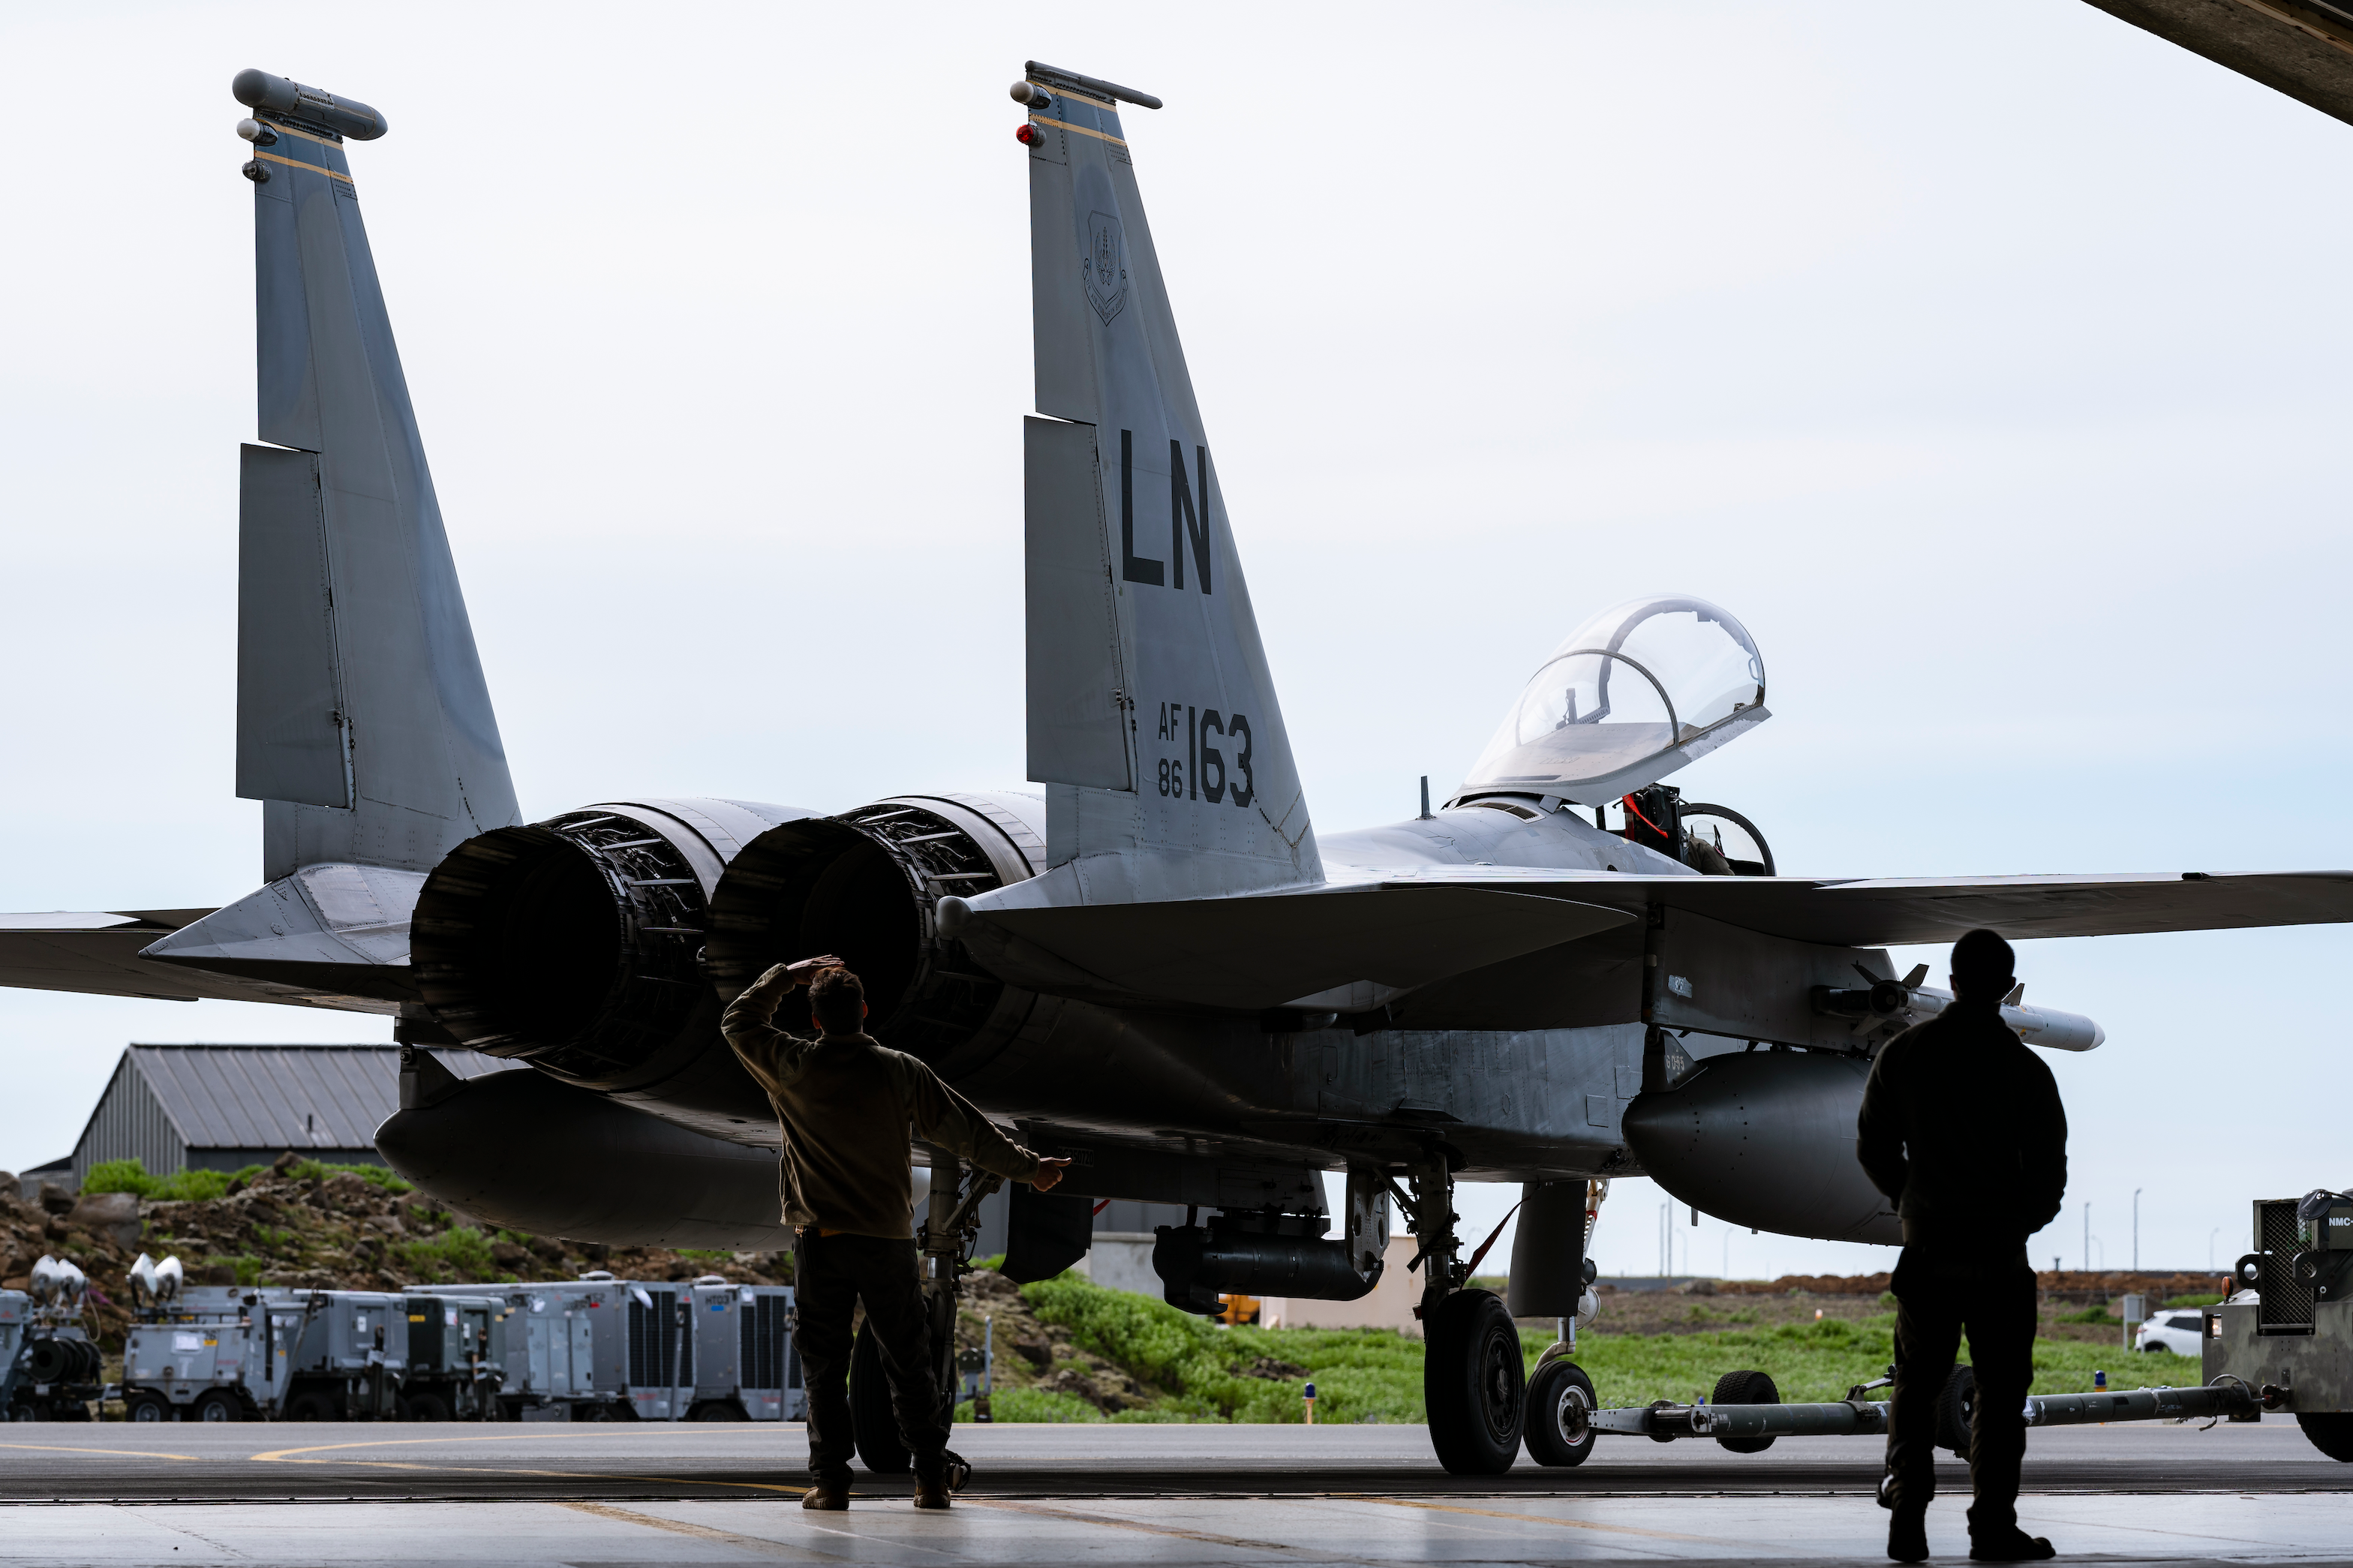 U.S. Air Force Airmen assigned to the 748th Aircraft Maintenance Squadron help guide an F-15C Eagle into a hardened aircraft shelter during NATO Air Policing operations at Keflavik Air Base, Iceland, July 27, 2021. NATO Air Policing is a peacetime collective defense mission that safeguards the integrity of NATO alliance members' airspace. (U.S. Air Force photo by Staff Sgt. Rachel Maxwell)